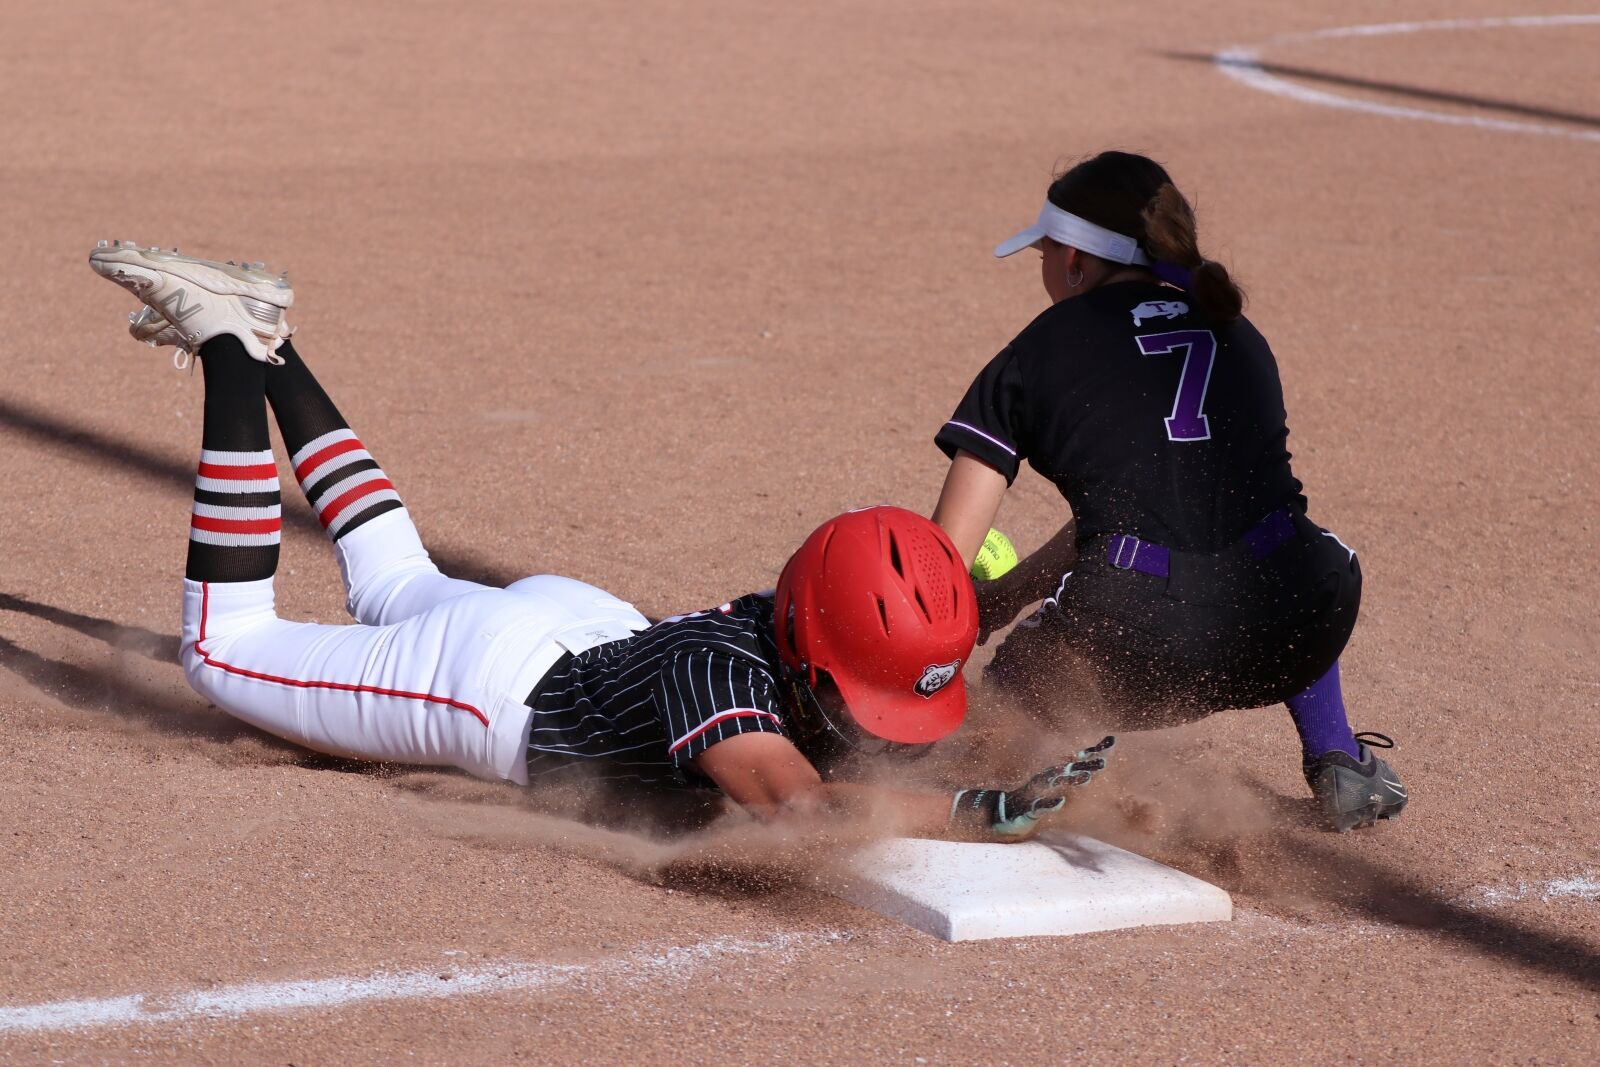 Bear River Softball Triumphs over Tooele in Playoffs with Emma Harrow and Katelyn Wilson Leading the Way